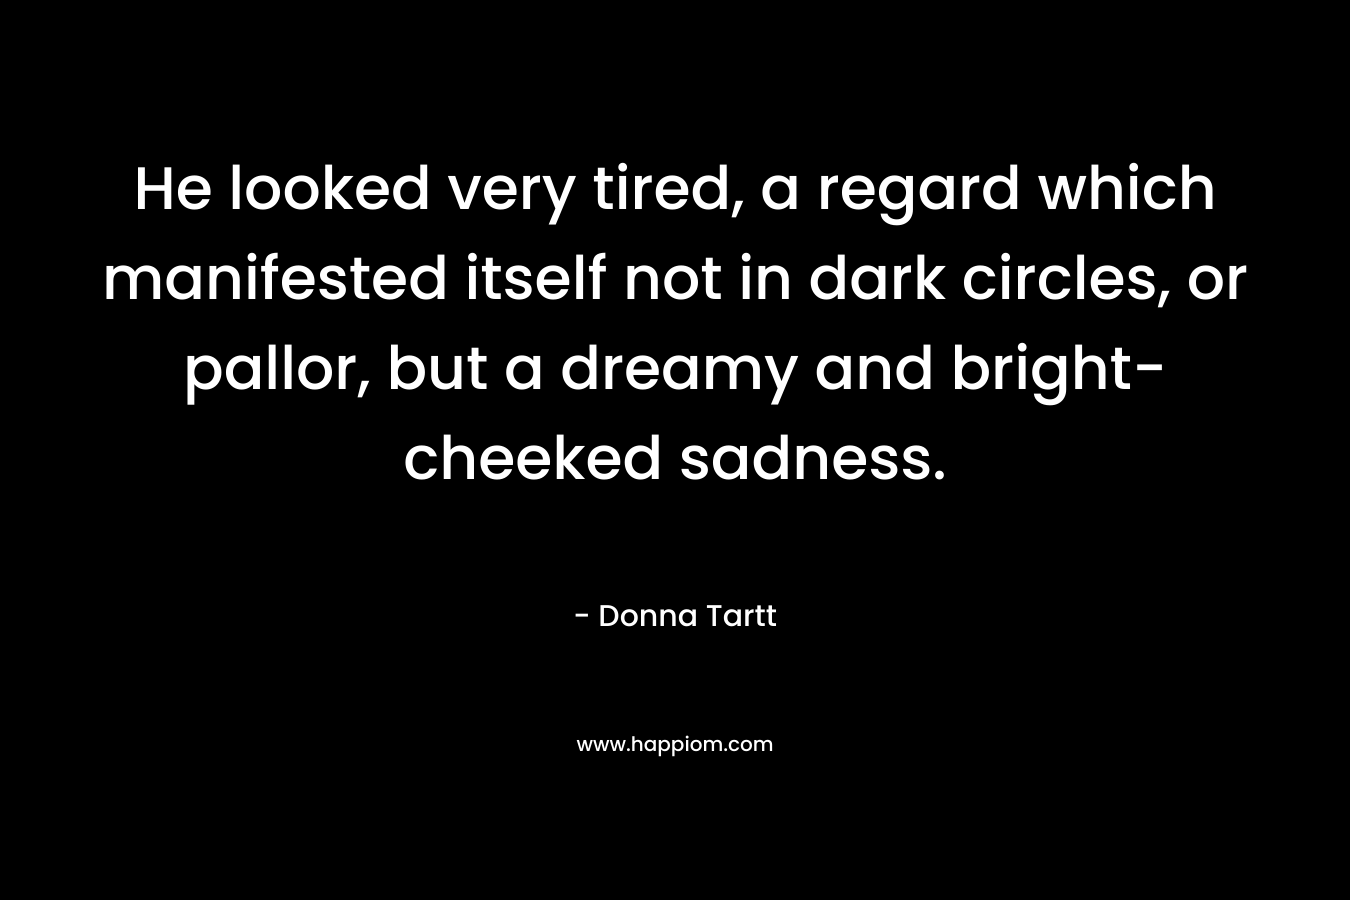 He looked very tired, a regard which manifested itself not in dark circles, or pallor, but a dreamy and bright-cheeked sadness. – Donna Tartt